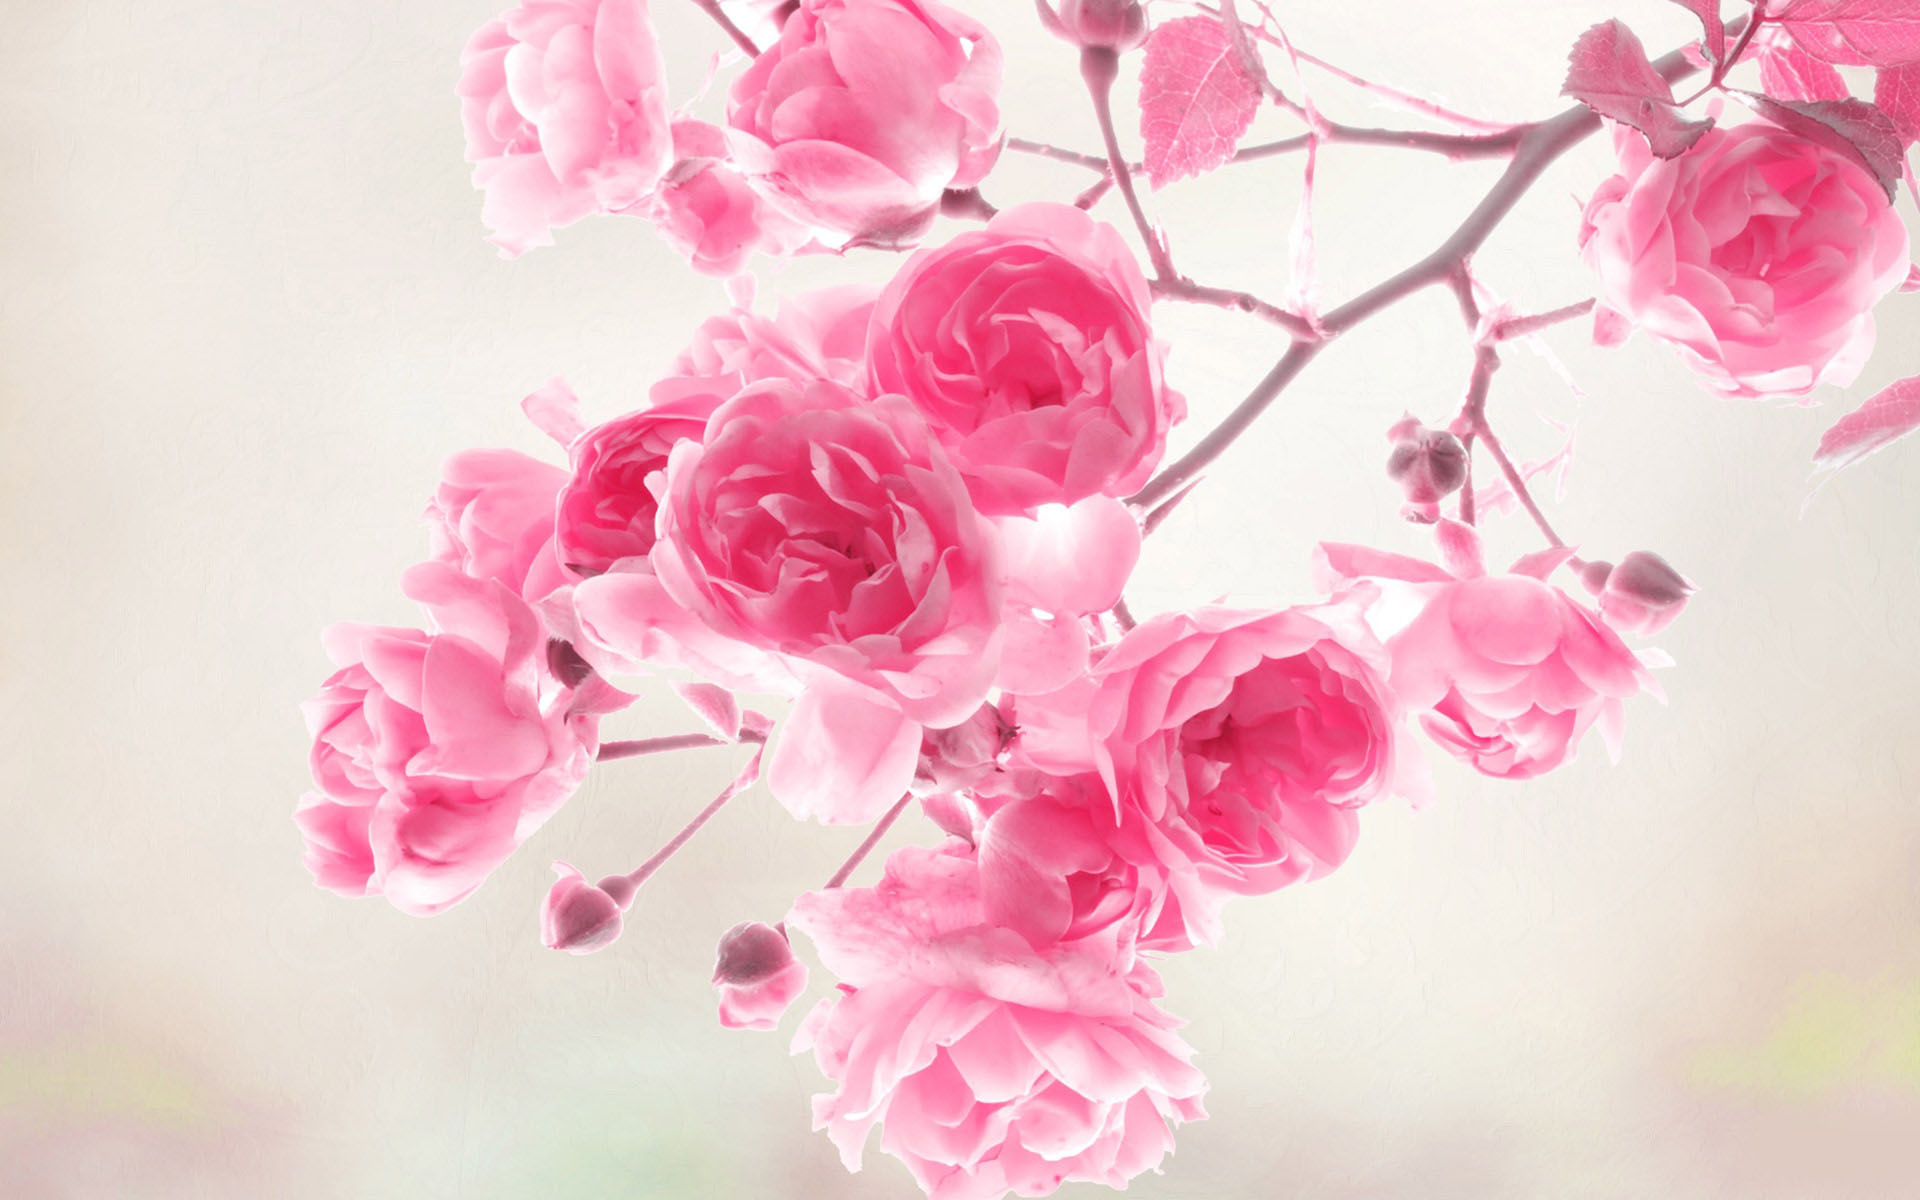 40 Beautiful Flower Wallpapers for your